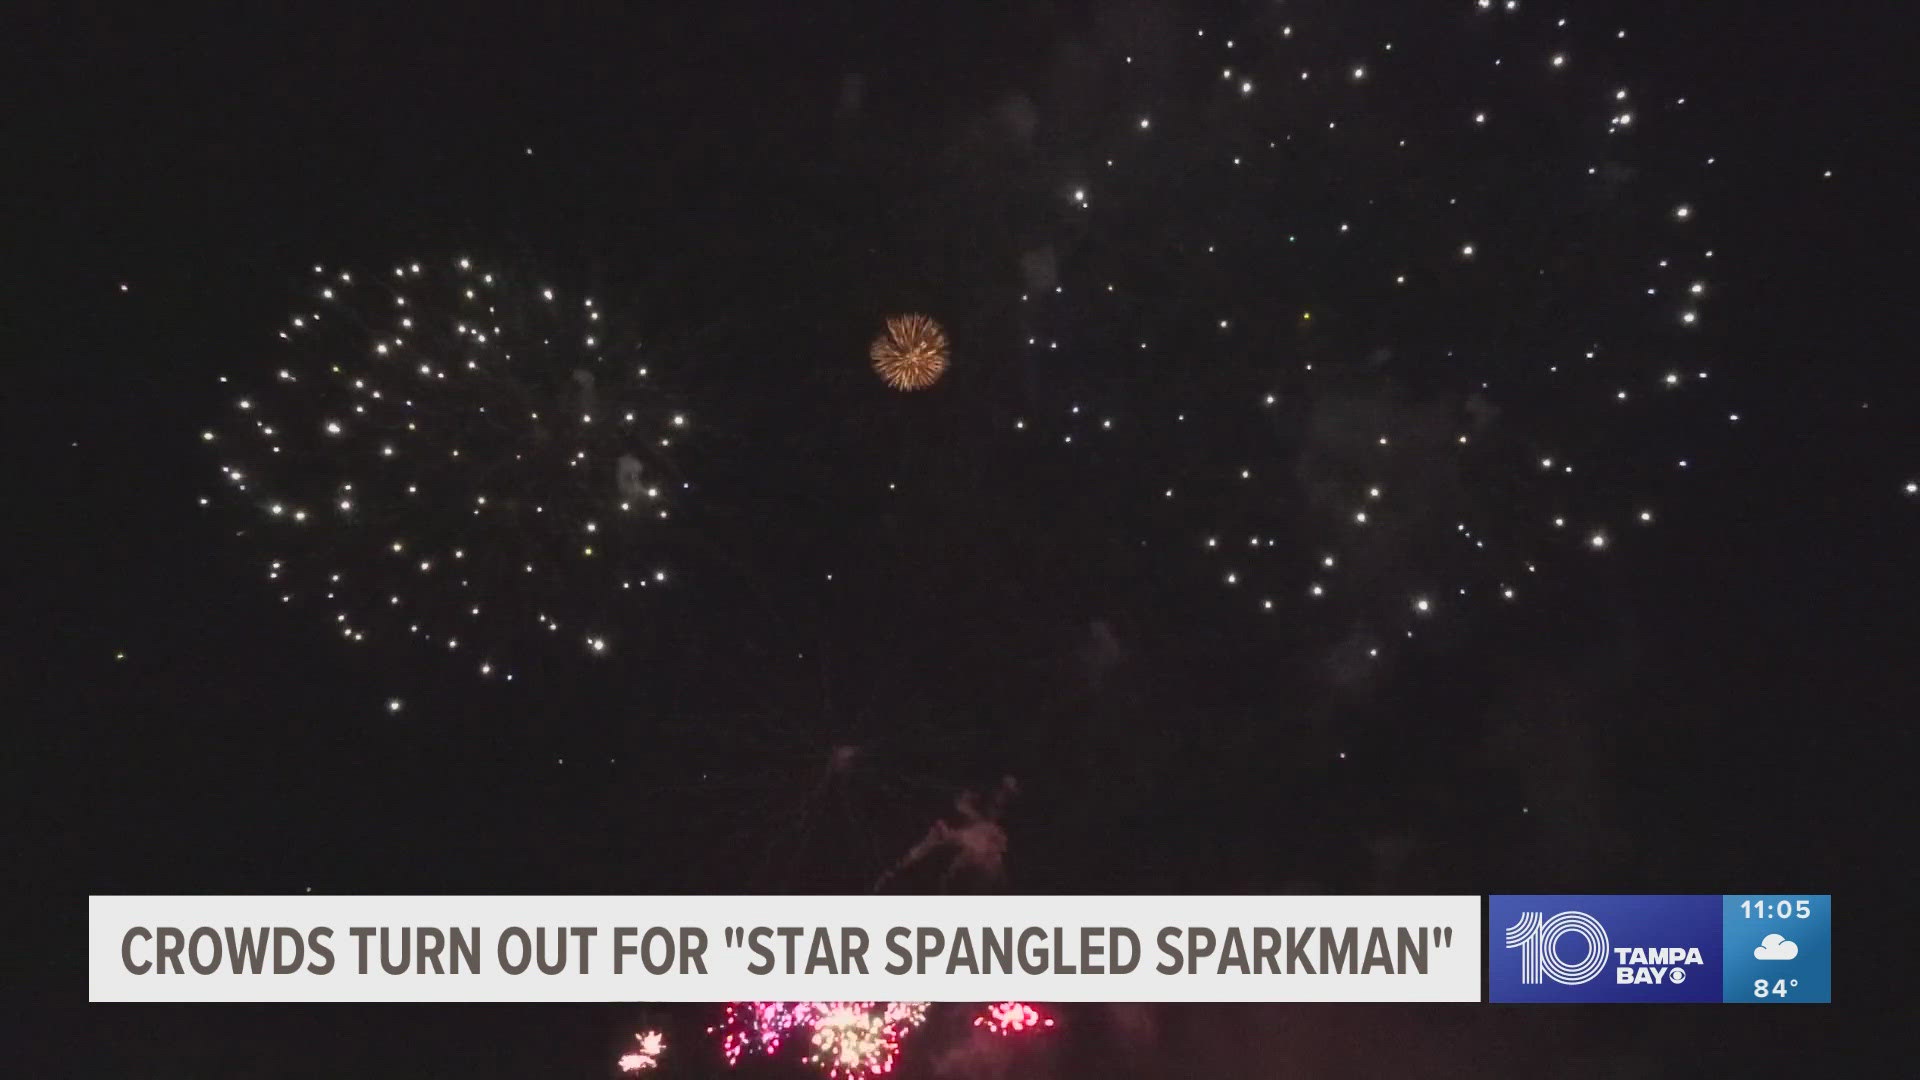 Residents braved through Thursday's heat advisory to get a good seat for this year's dazzling "Star Spangled Sparkman" show.